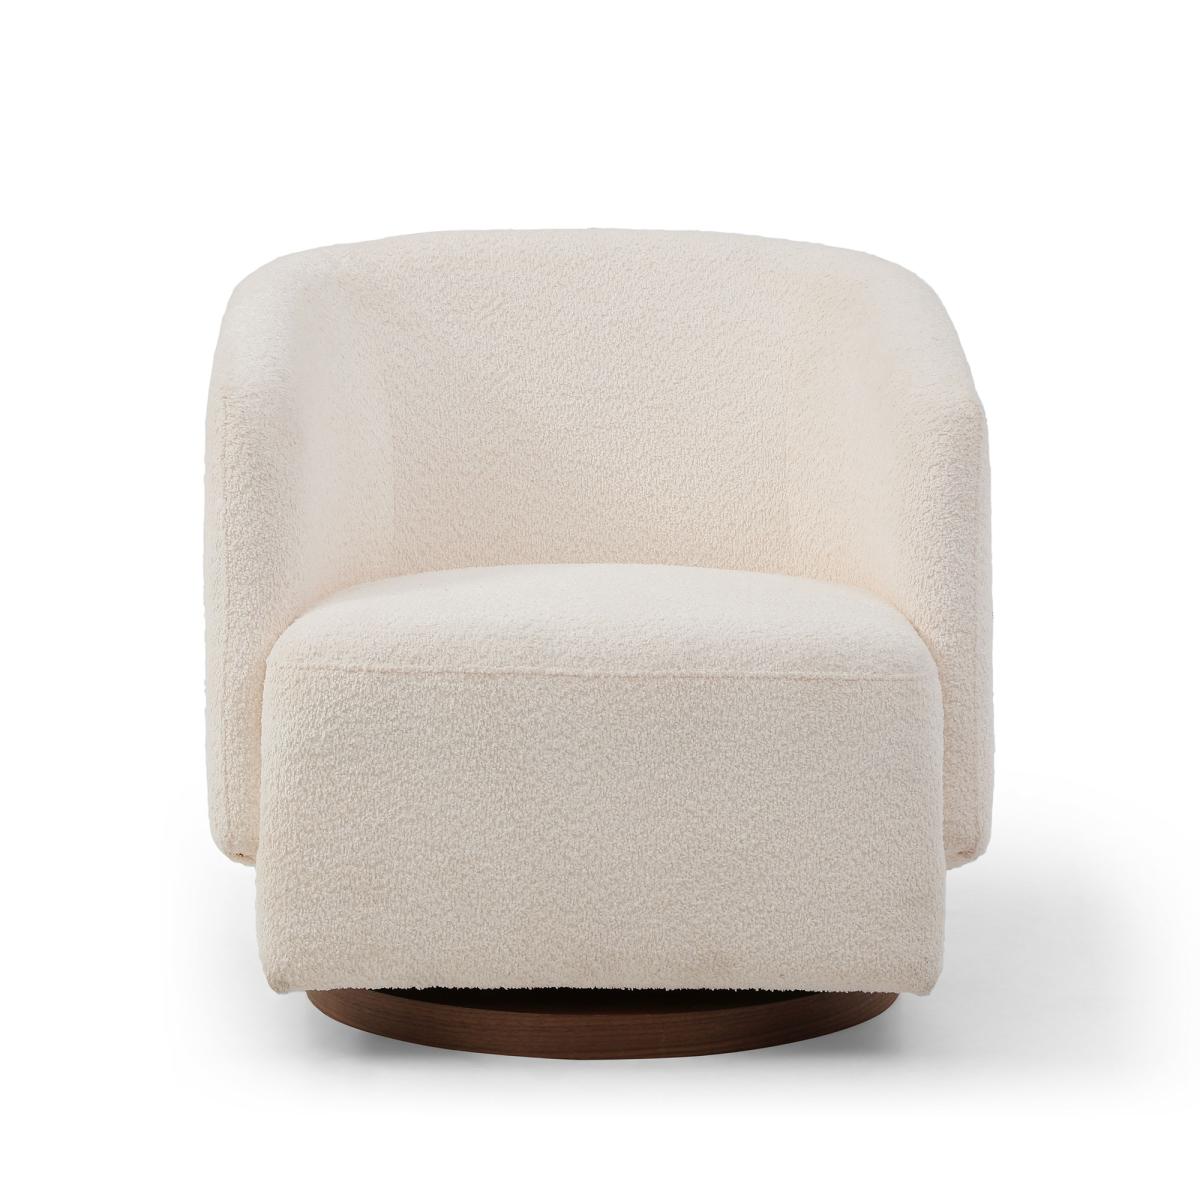 Swivel Accent Chair Armchair Round Barrel Chair for Living Room Bedroom